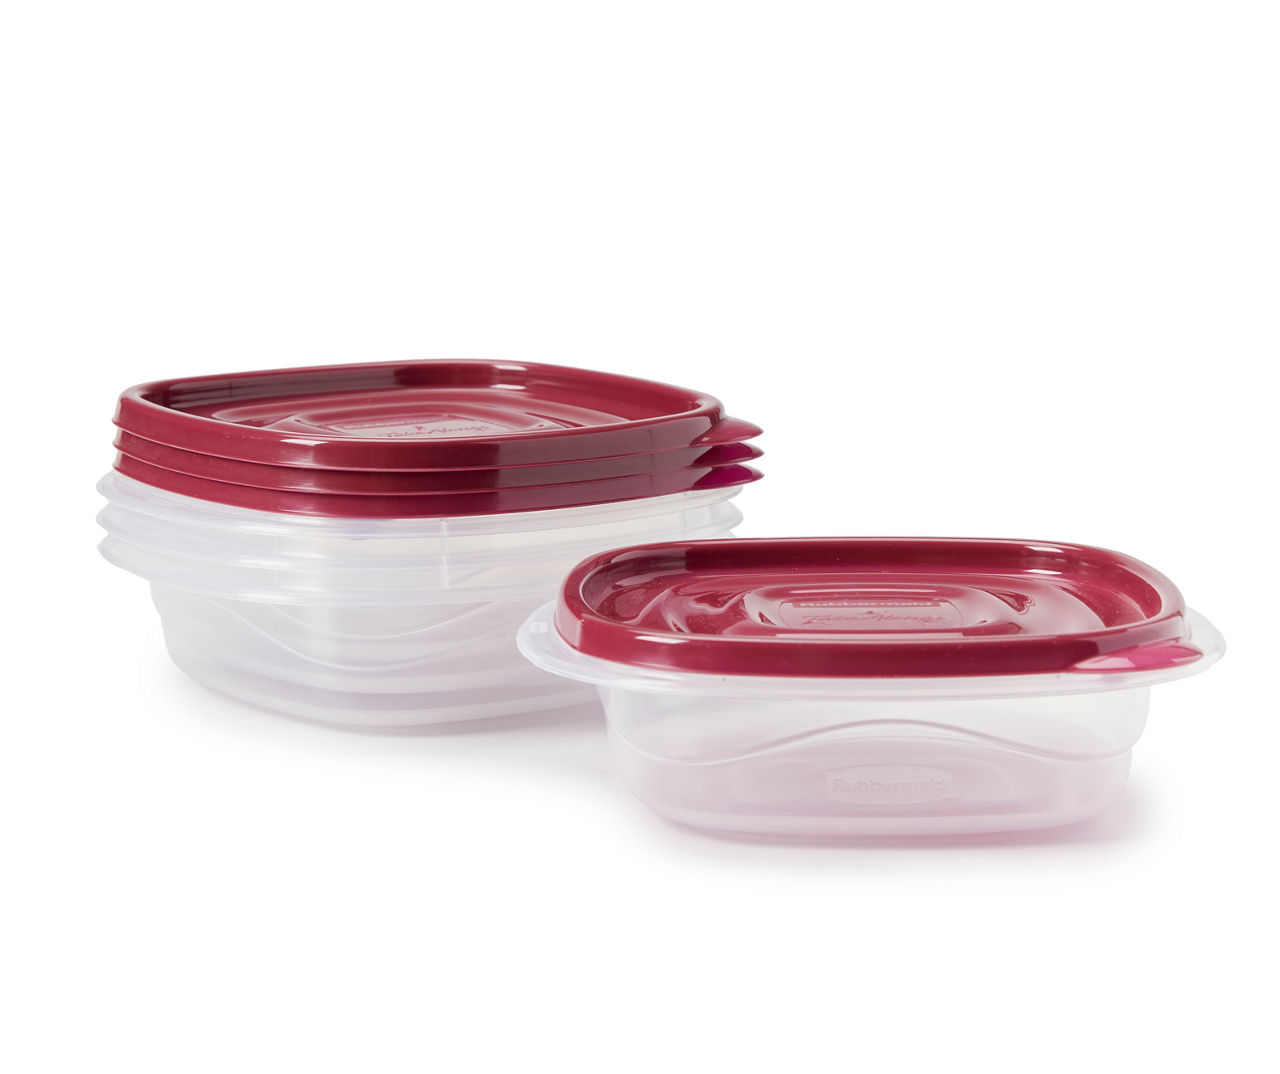 Rubbermaid TakeAlongs Square Food Storage Containers, 2.9 Cup